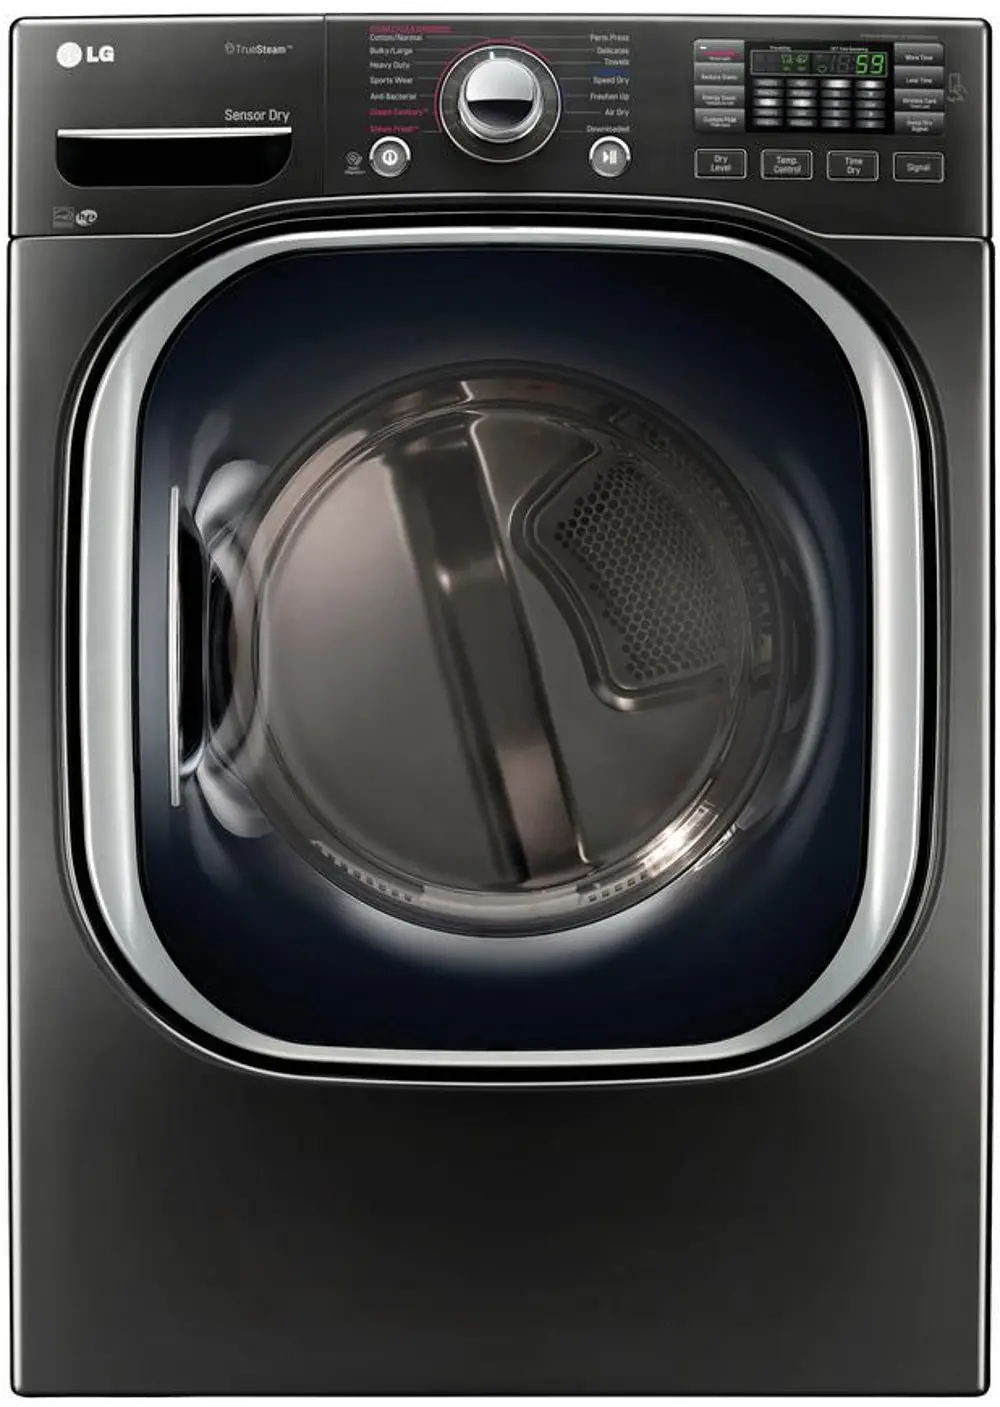 DLEX4370K LG Electric Dryer with Steam - 7.4 cu. ft. Black Stainless Steel-1